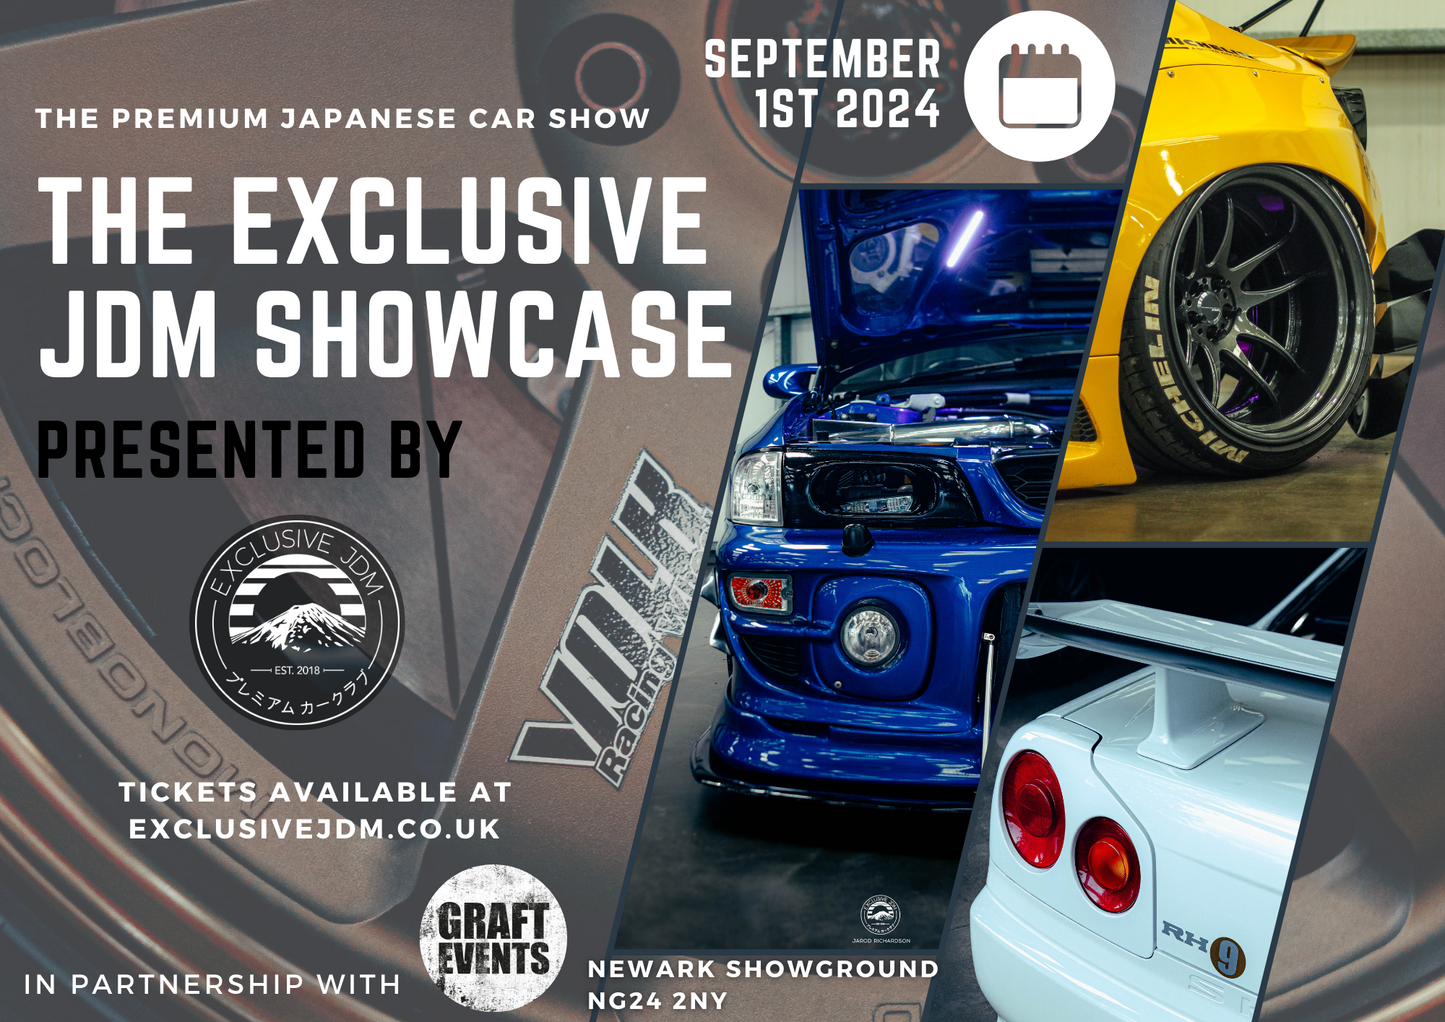 The Exclusive JDM Showcase